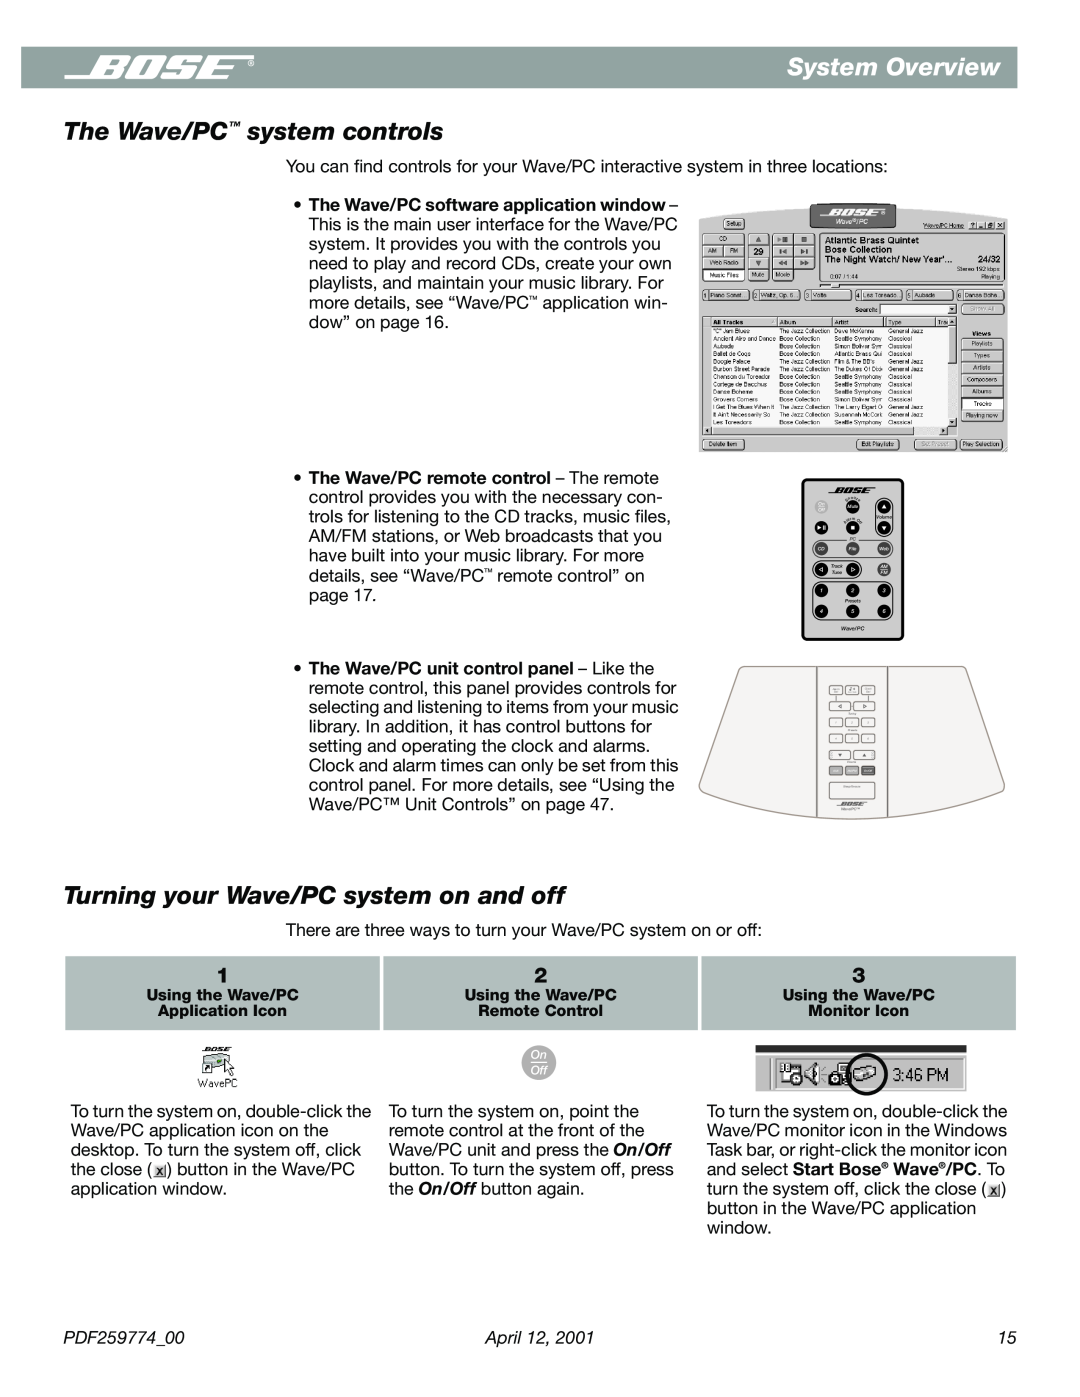 Bose PDF259774_00 manual System Overview, The Wave/PC system controls, Turning your Wave/PC system on and off 